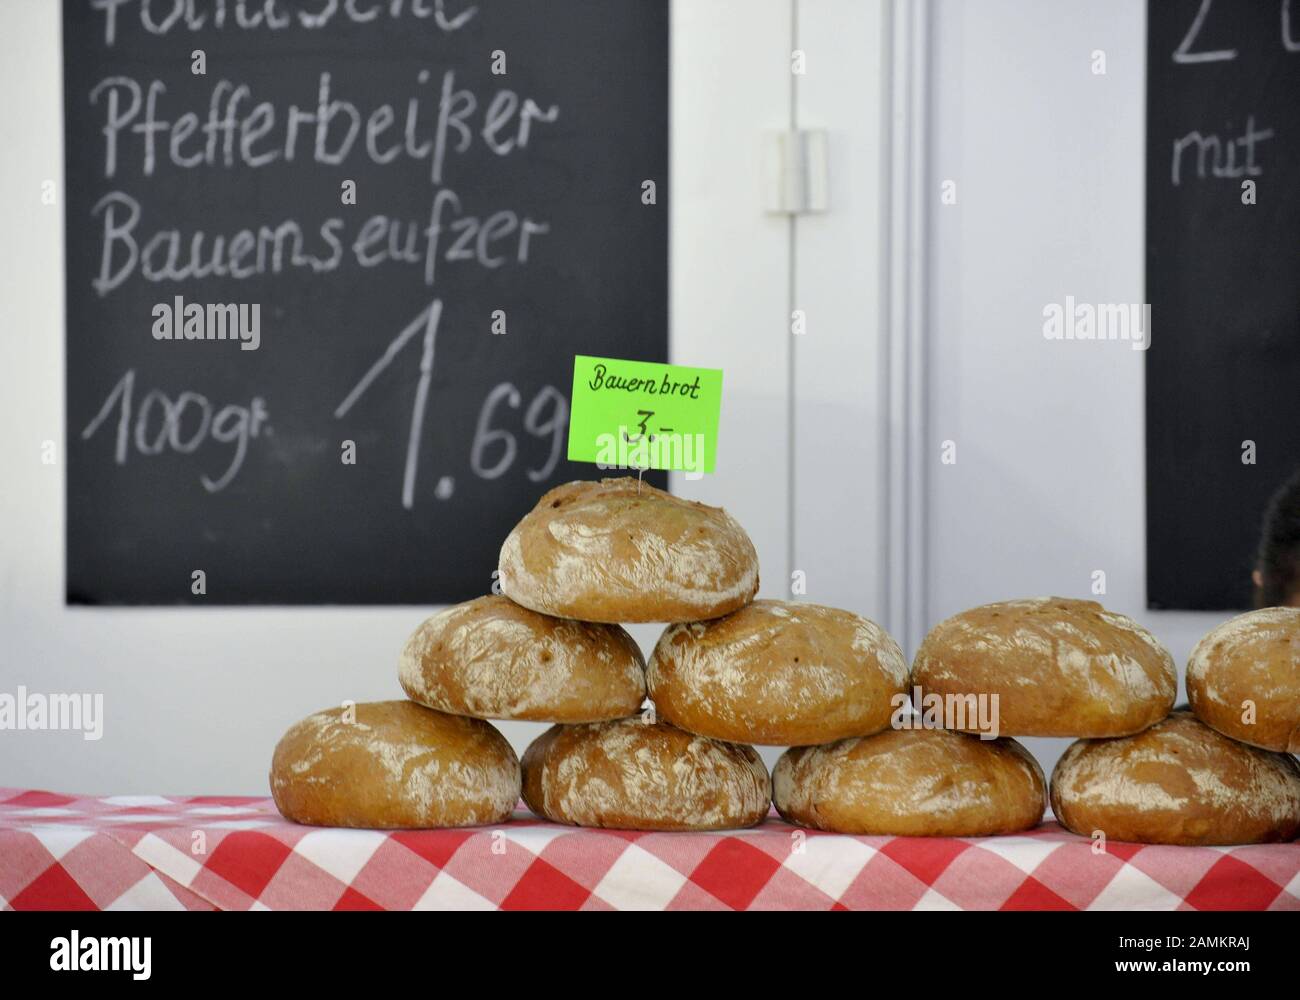 Bauernbrot at a stand at the trade fair 'Food and Life' in Munich Riem. [automated translation] Stock Photo